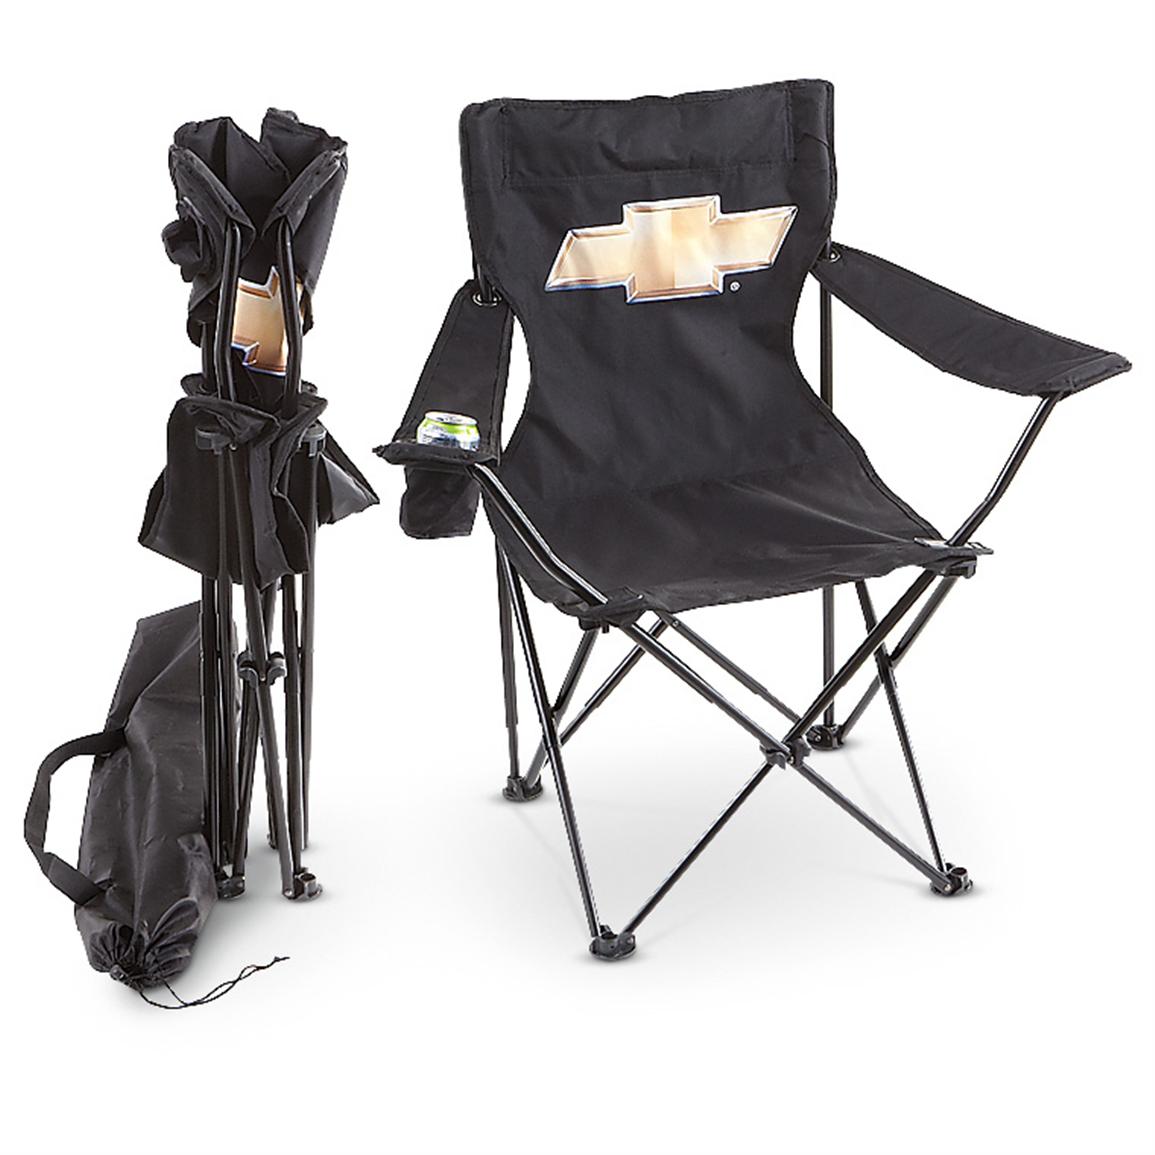 2 Chevy® Camp Chairs - 214336, Chairs at Sportsman's Guide